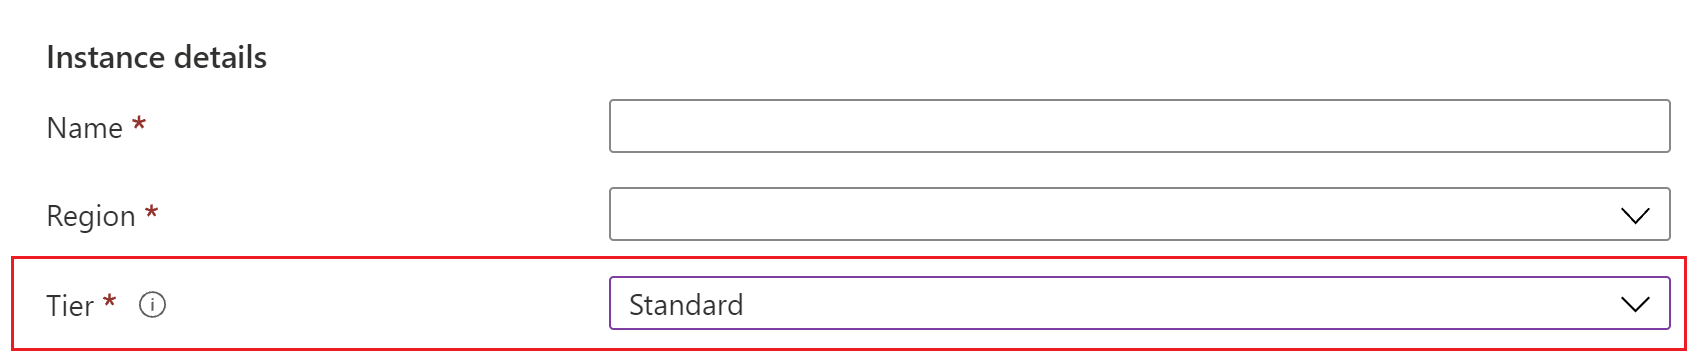 Settings for a new bastion host with Standard SKU selected.